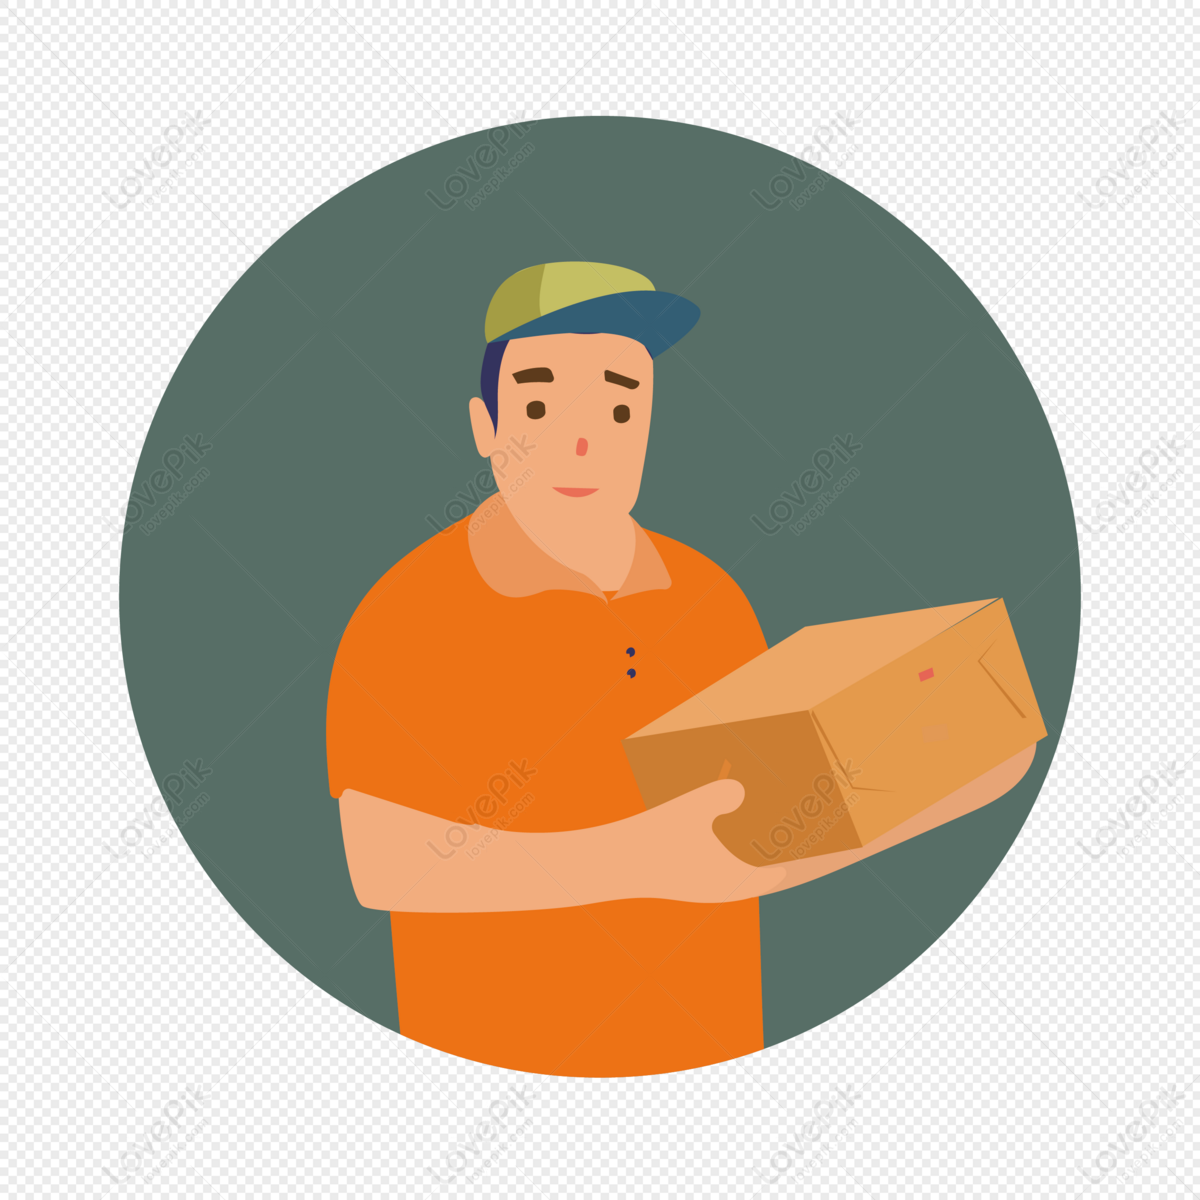 Cartoon Boy Holding Box Vector Material, Box, Cartoon, Cartoon Box PNG  Transparent Image And Clipart Image For Free Download - Lovepik